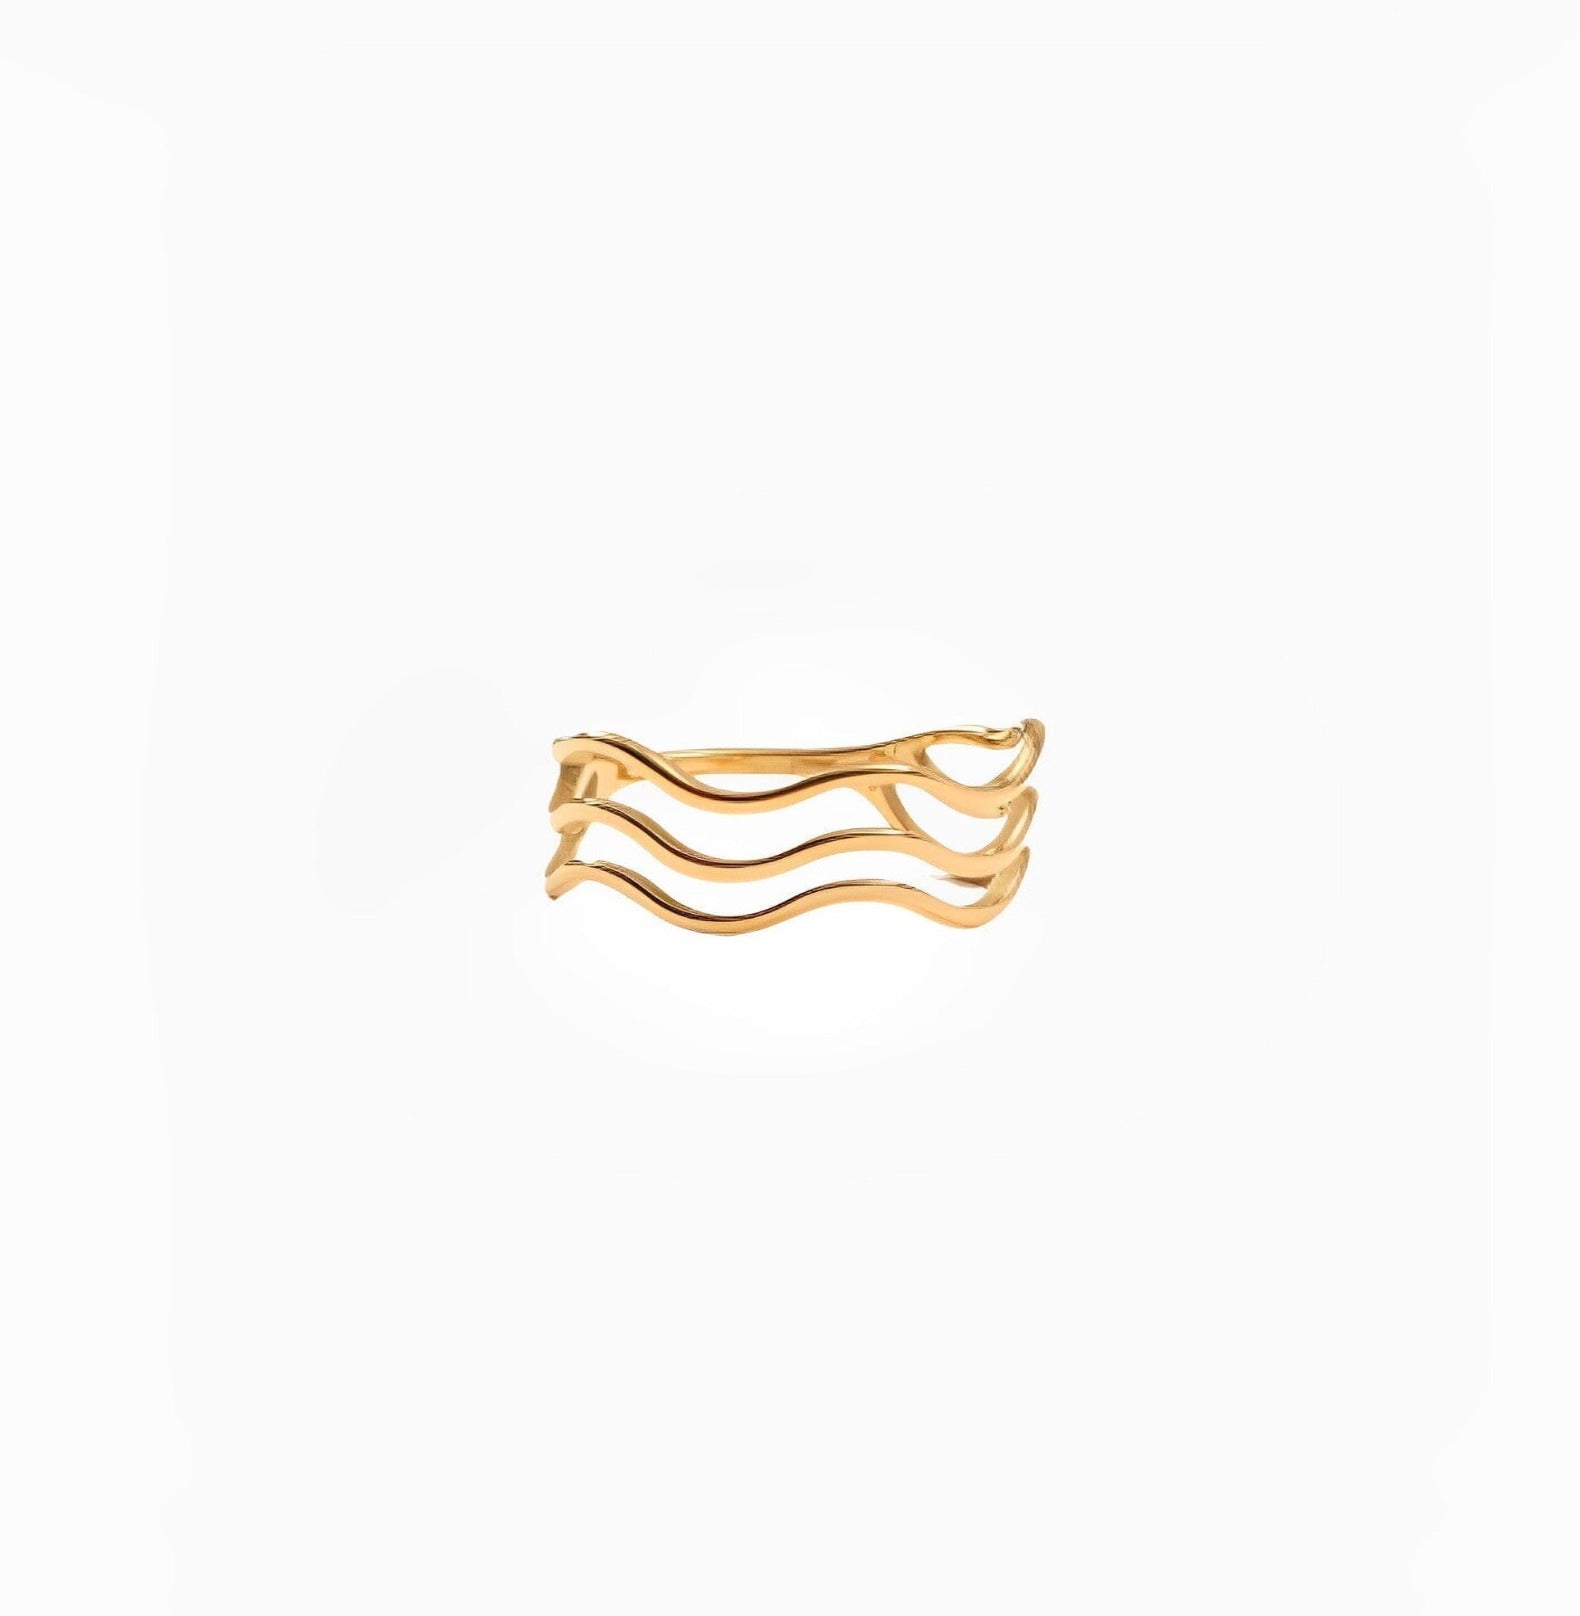 FINN RING braclet Yubama Jewelry Online Store - The Elegant Designs of Gold and Silver ! Gold No 6 